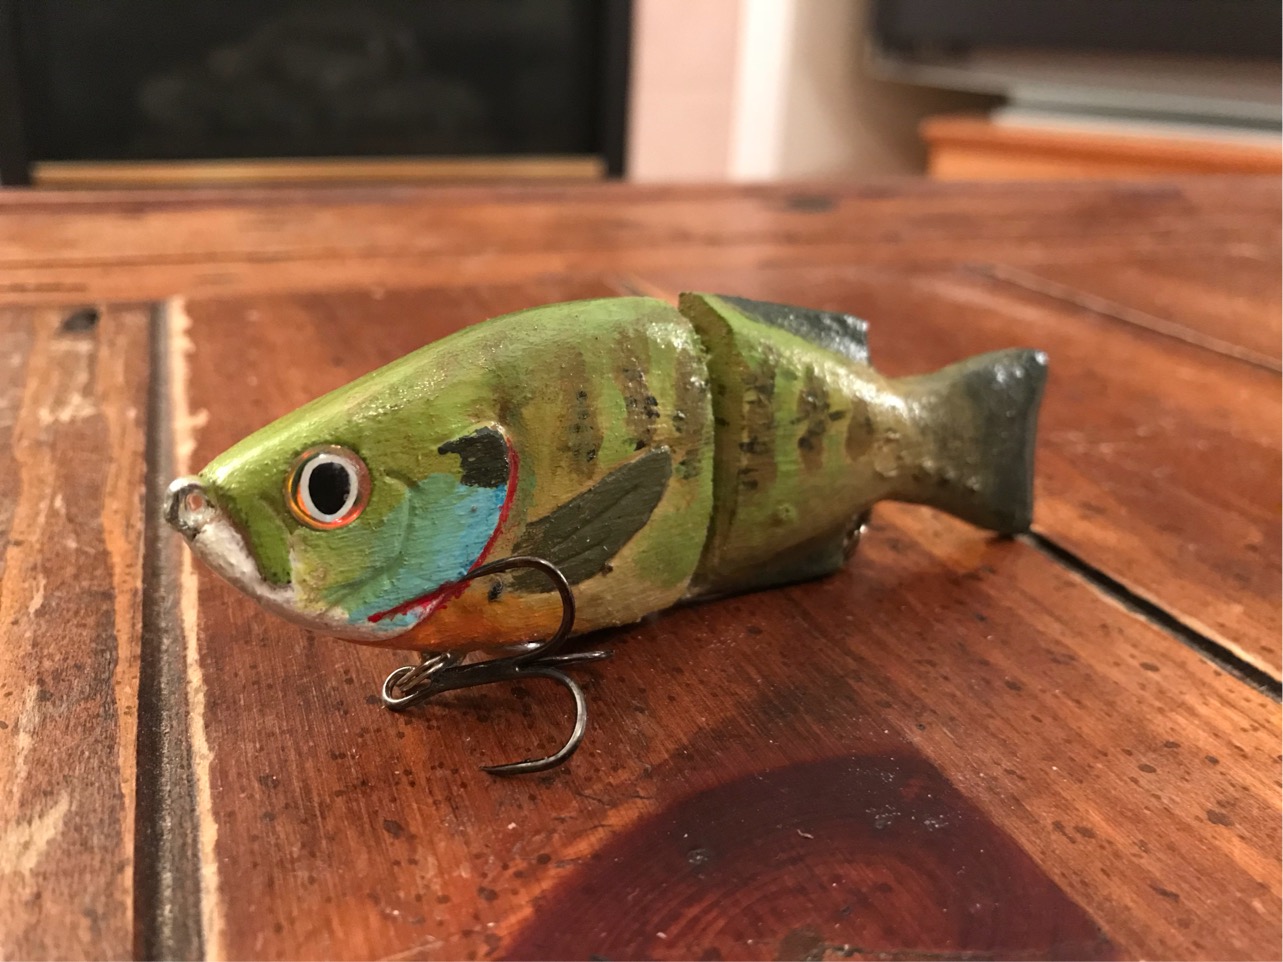 Making your own fishing lures, selling them, etc - HuntingNet